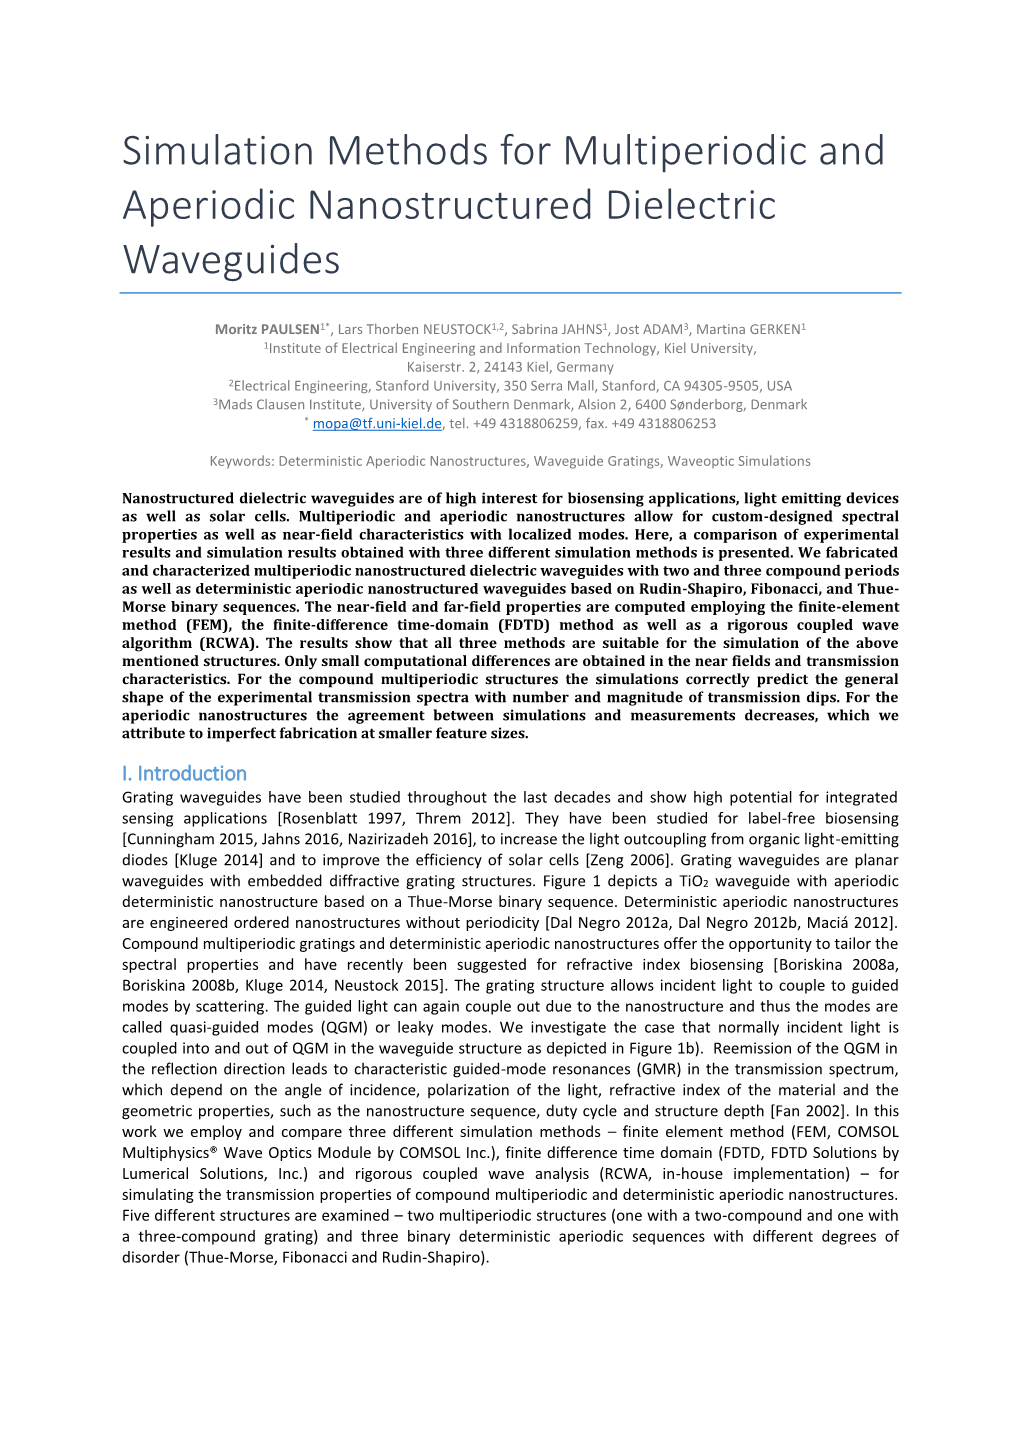 Simulation Methods for Multiperiodic and Aperiodic Nanostructured Dielectric Waveguides